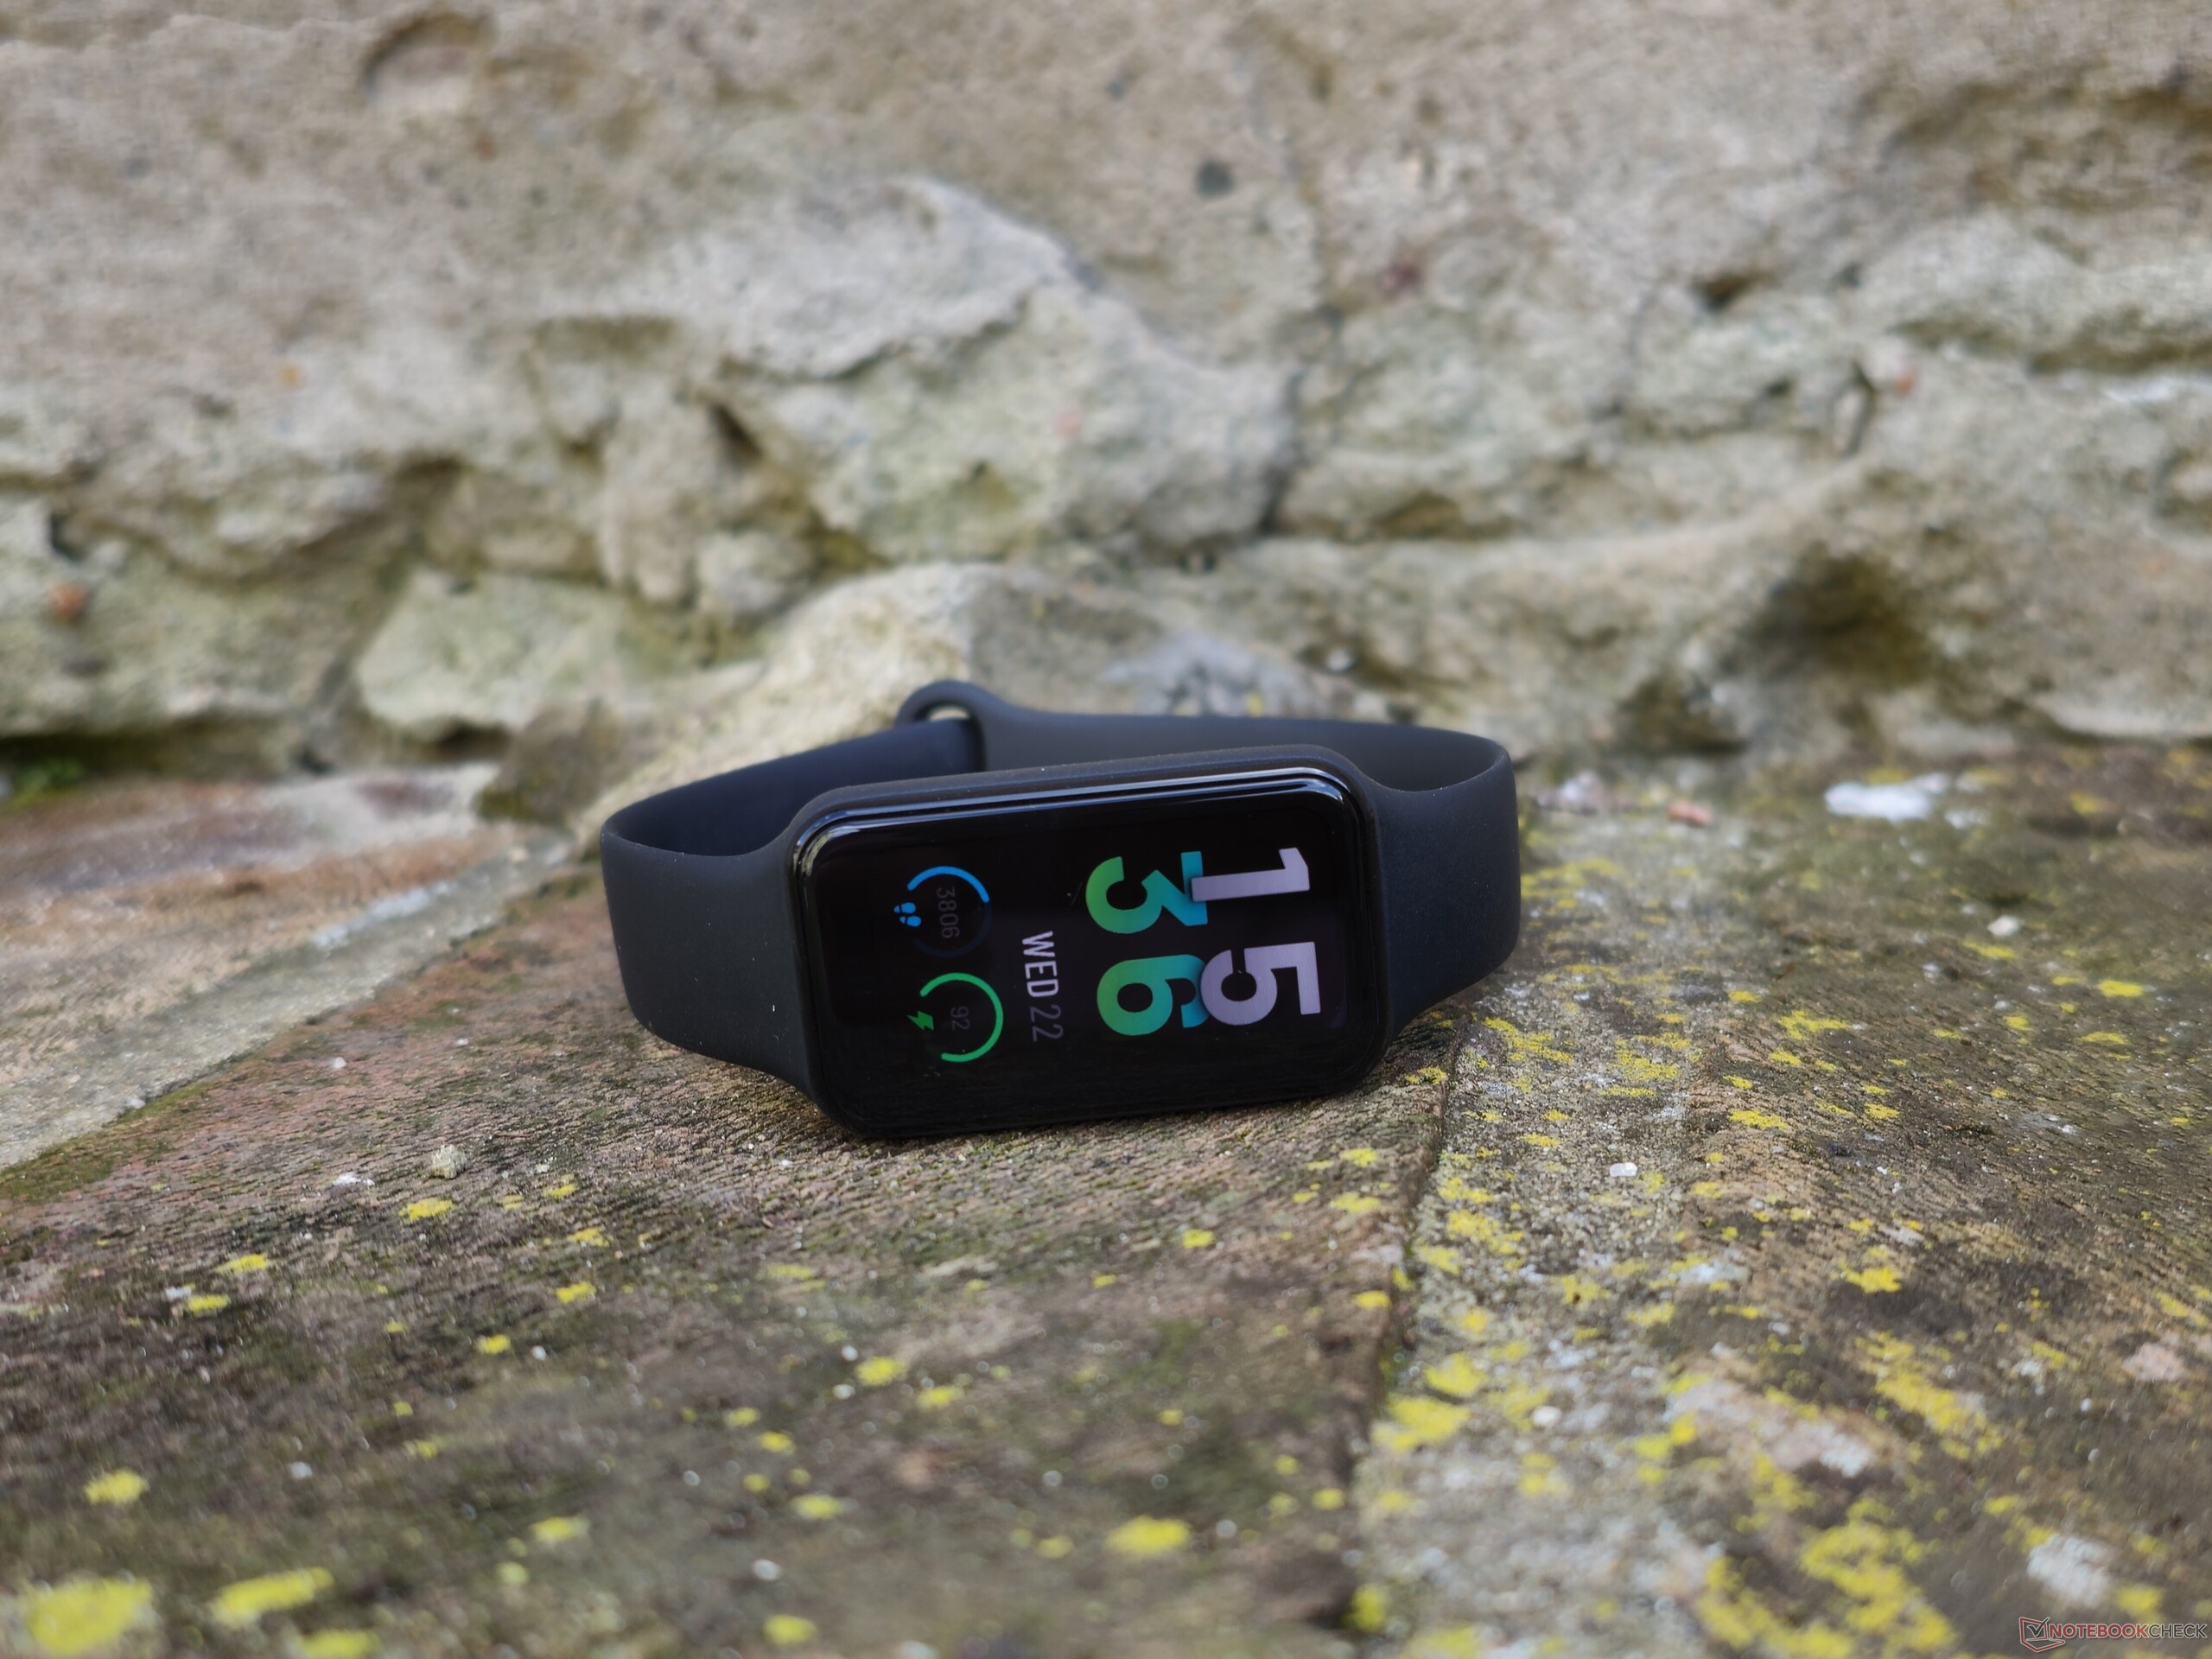 Amazfit Band 7 (2 stores) find prices • Compare today »